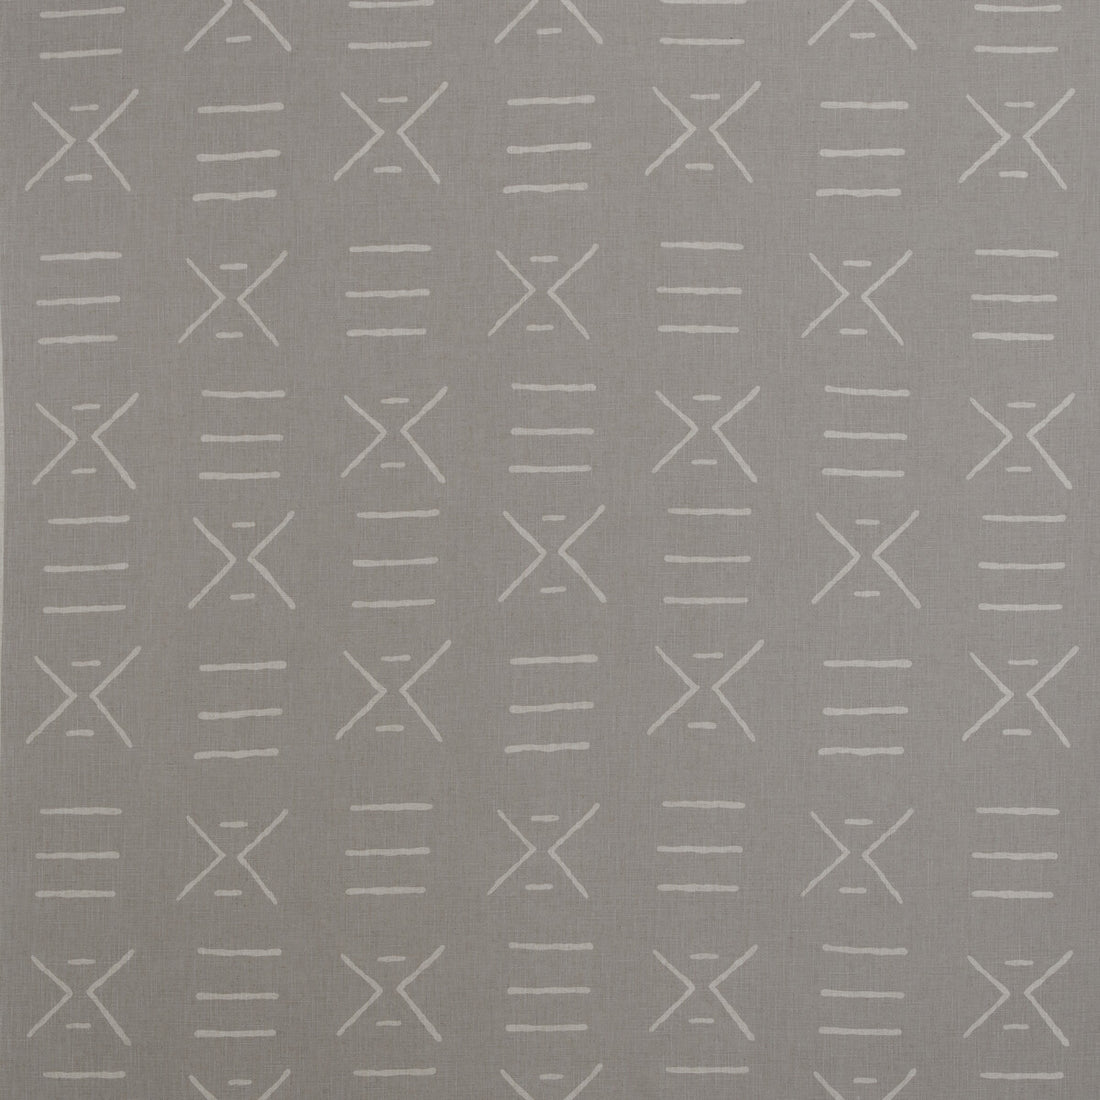 Kongo fabric in stone color - pattern AM100314.11.0 - by Kravet Couture in the Andrew Martin Gobi collection